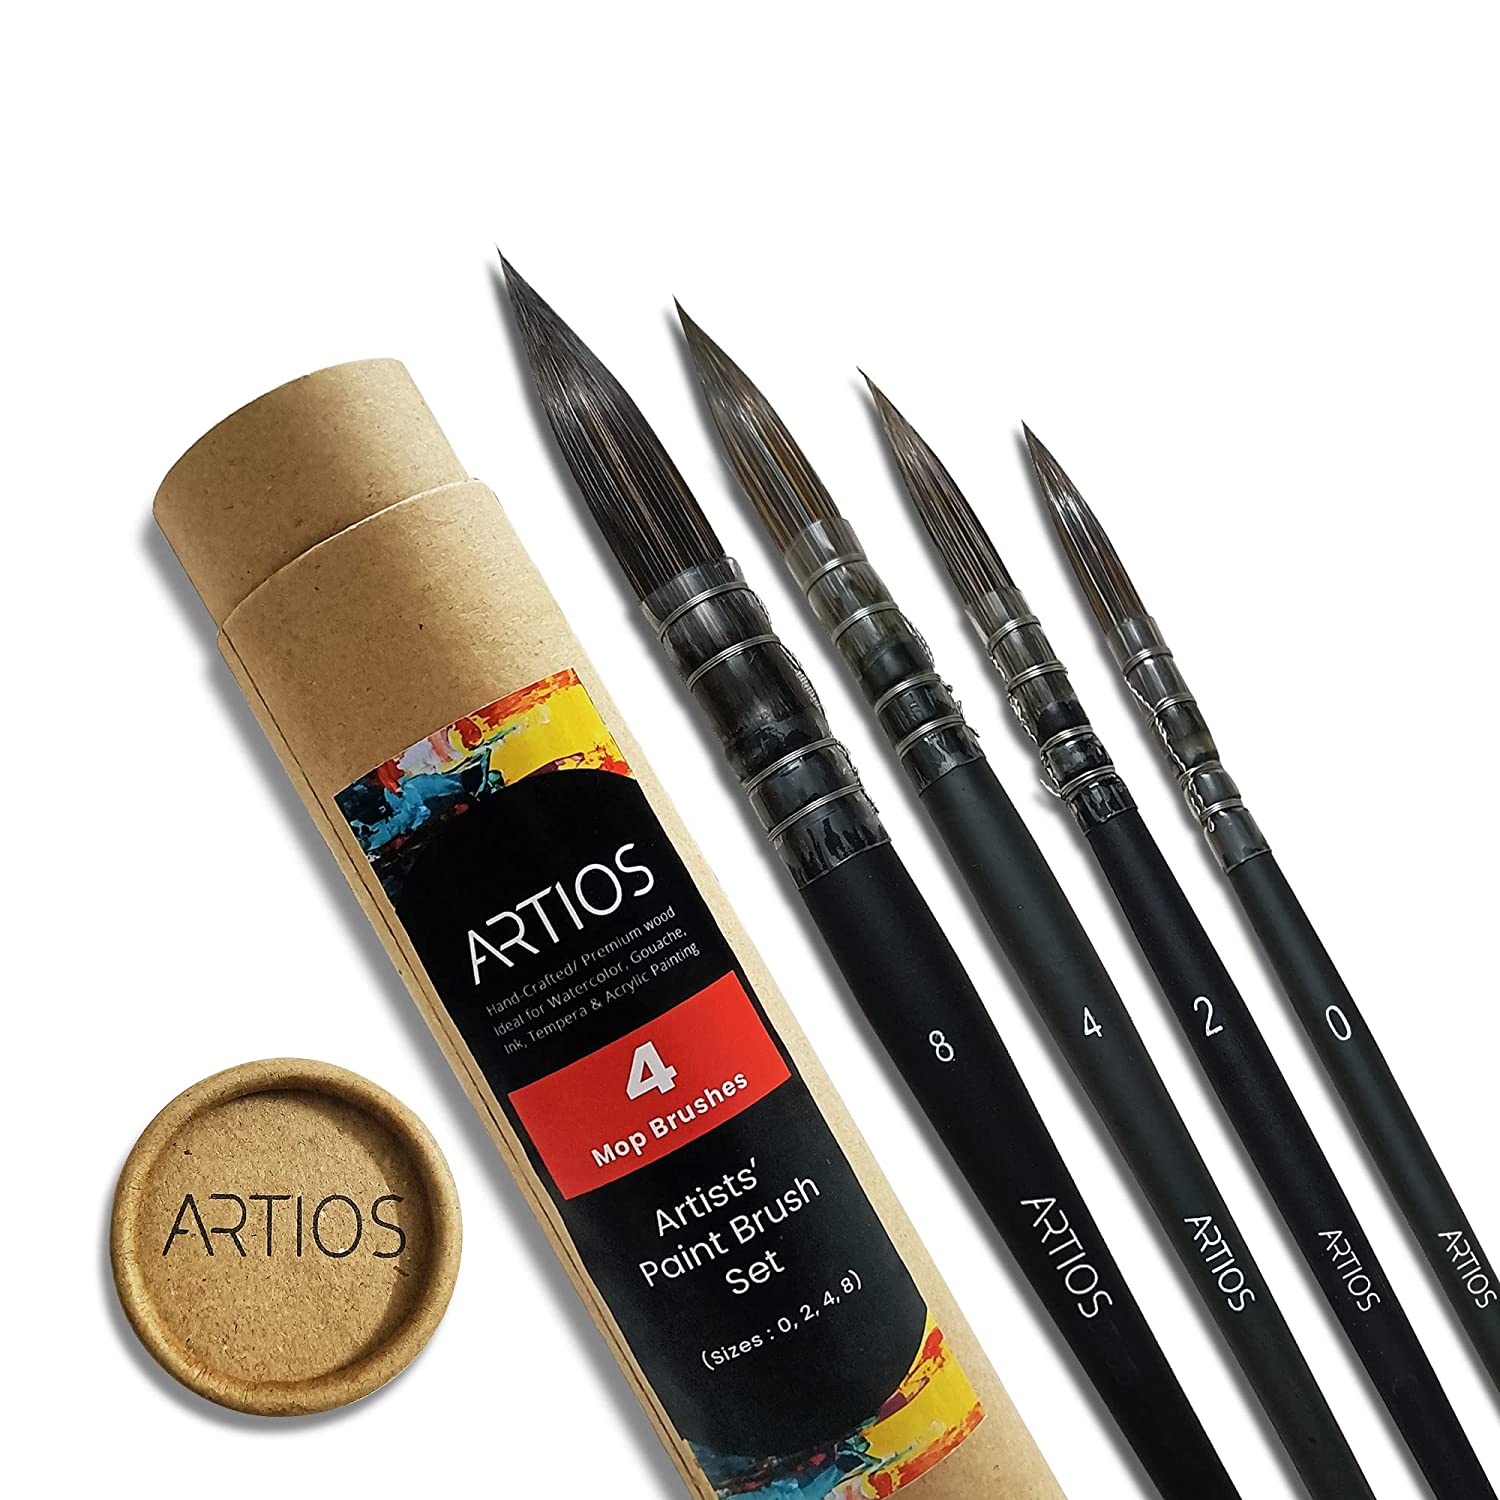 ARTIOS Set of 4 Mop Brush for Painting with Brush Holder - Premium  Watercolor Brush Set for